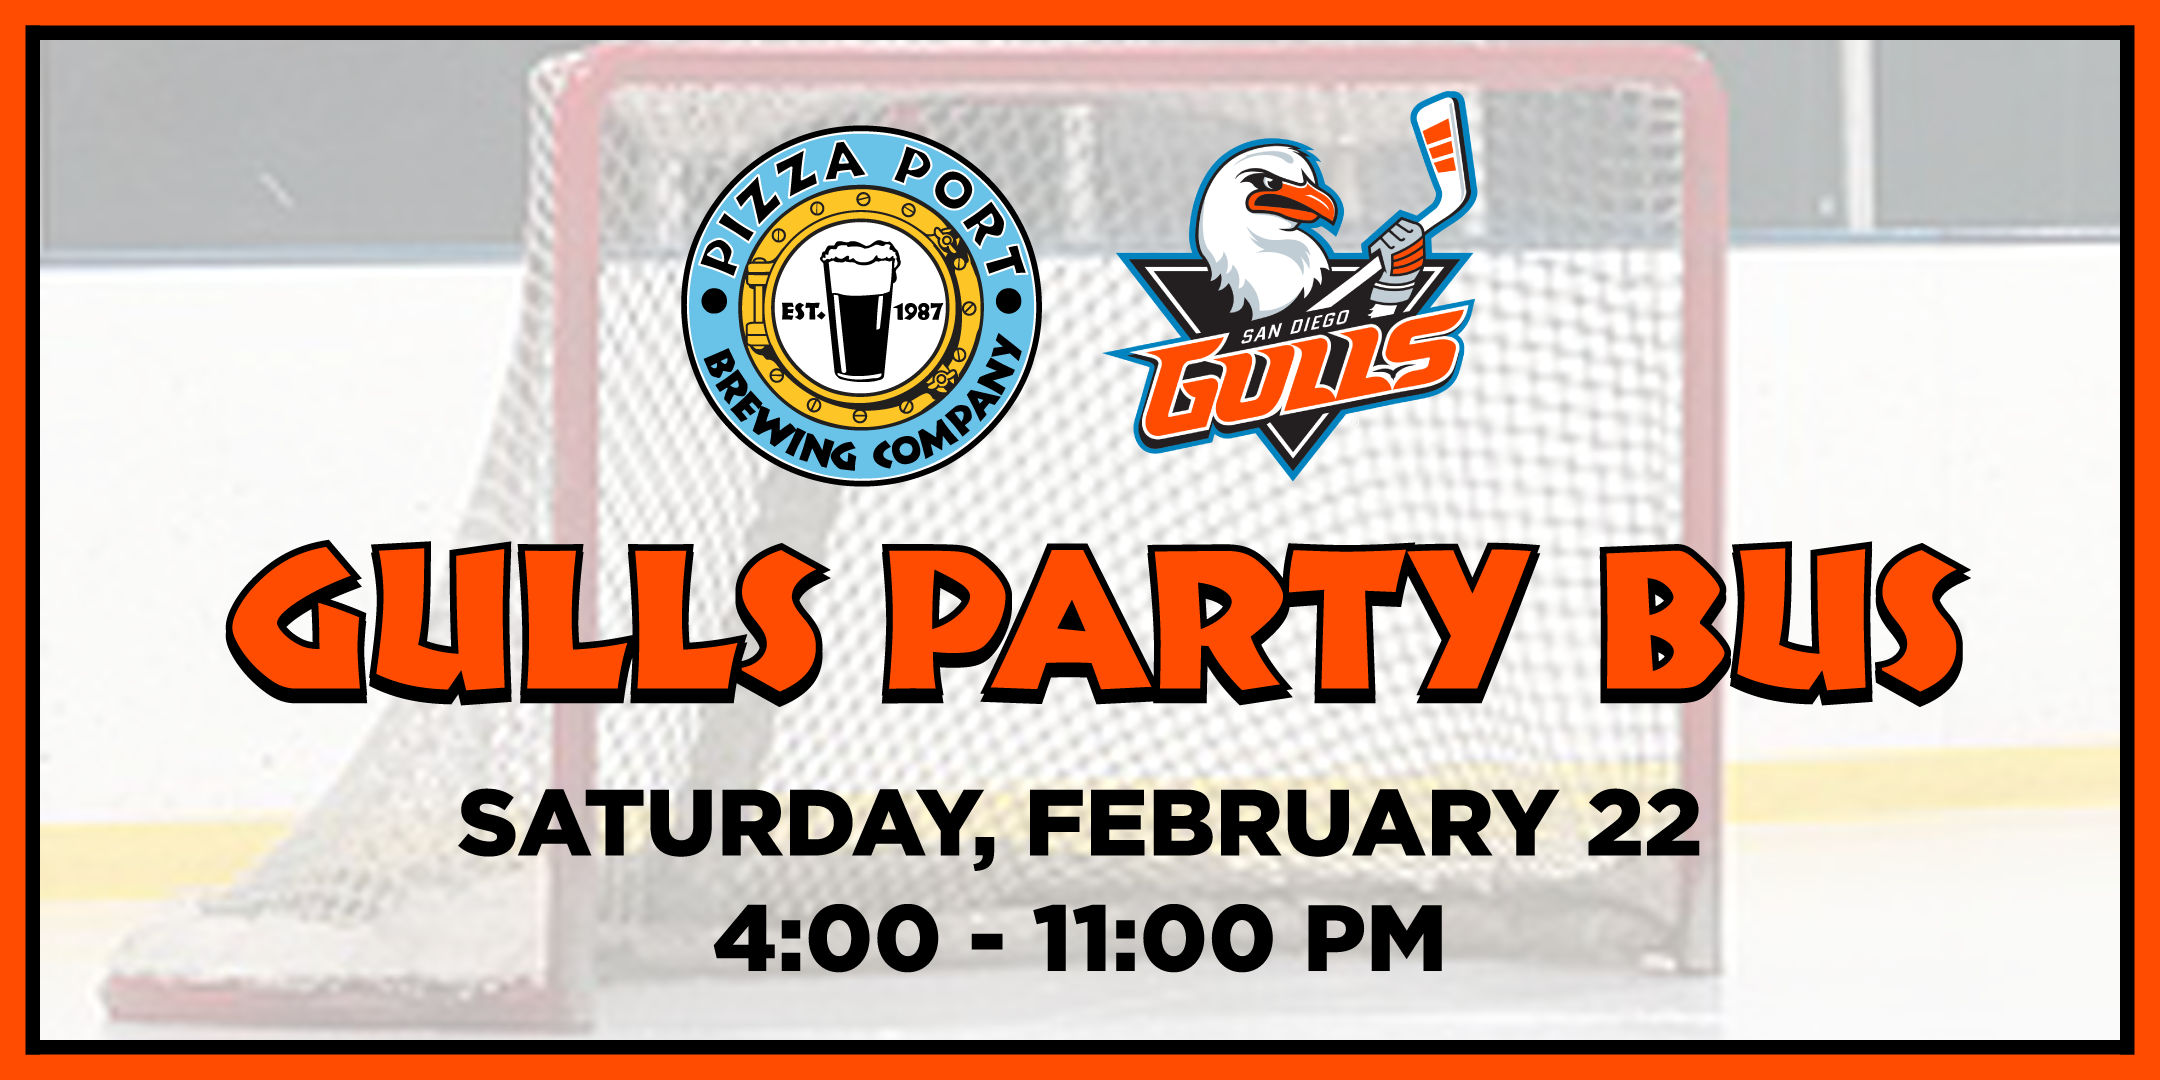 Pizza Port's San Diego Gulls Party Bus